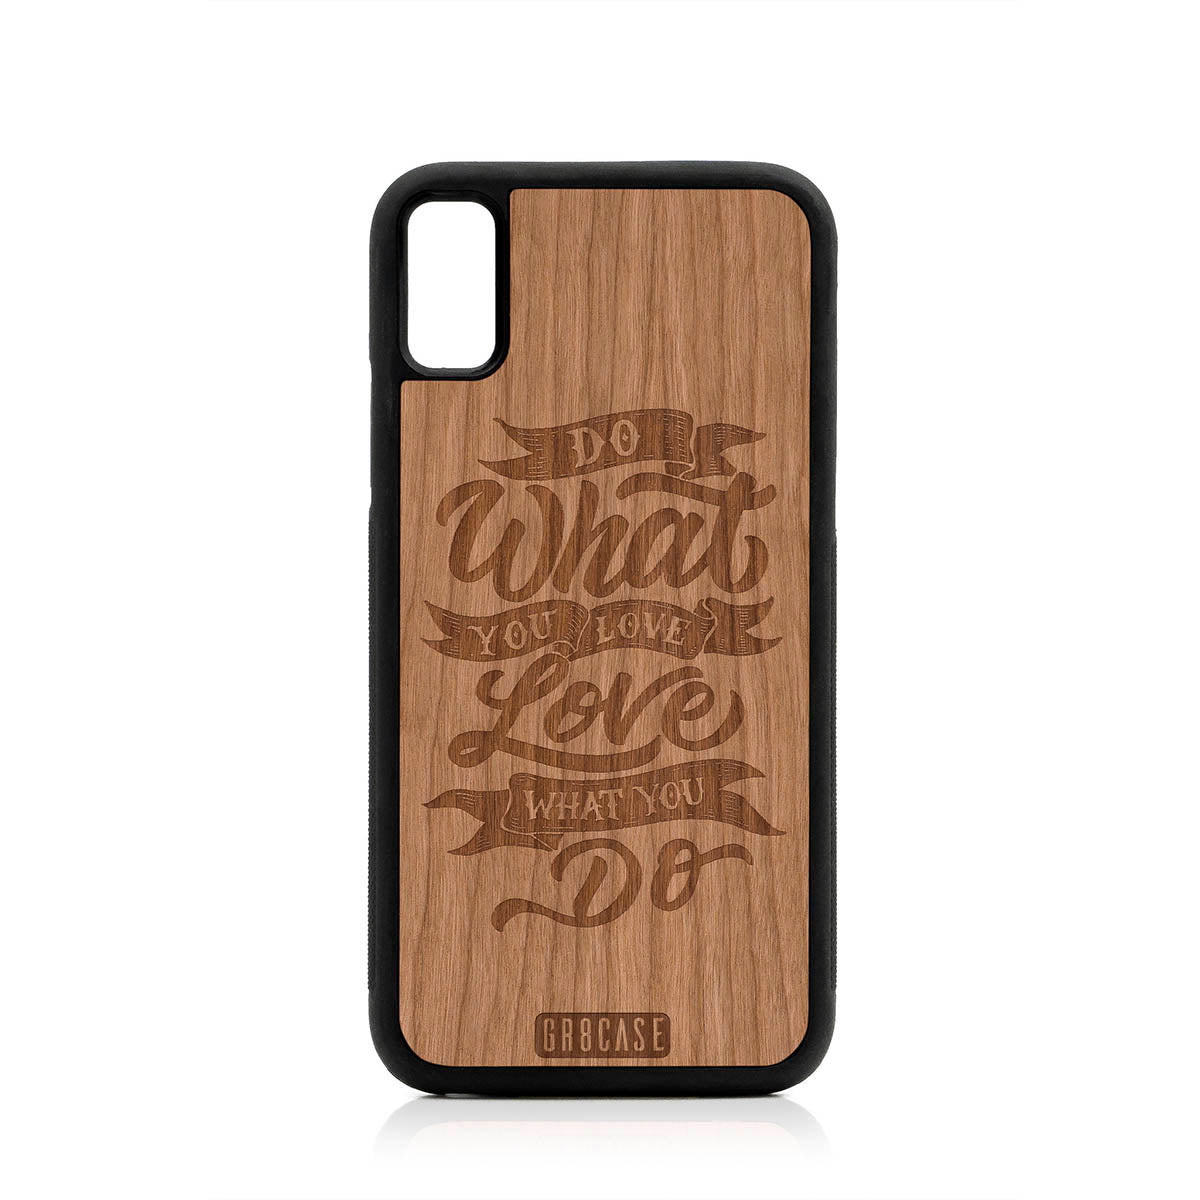 Do What You Love Love What You Do Design Wood Case For iPhone XR by GR8CASE